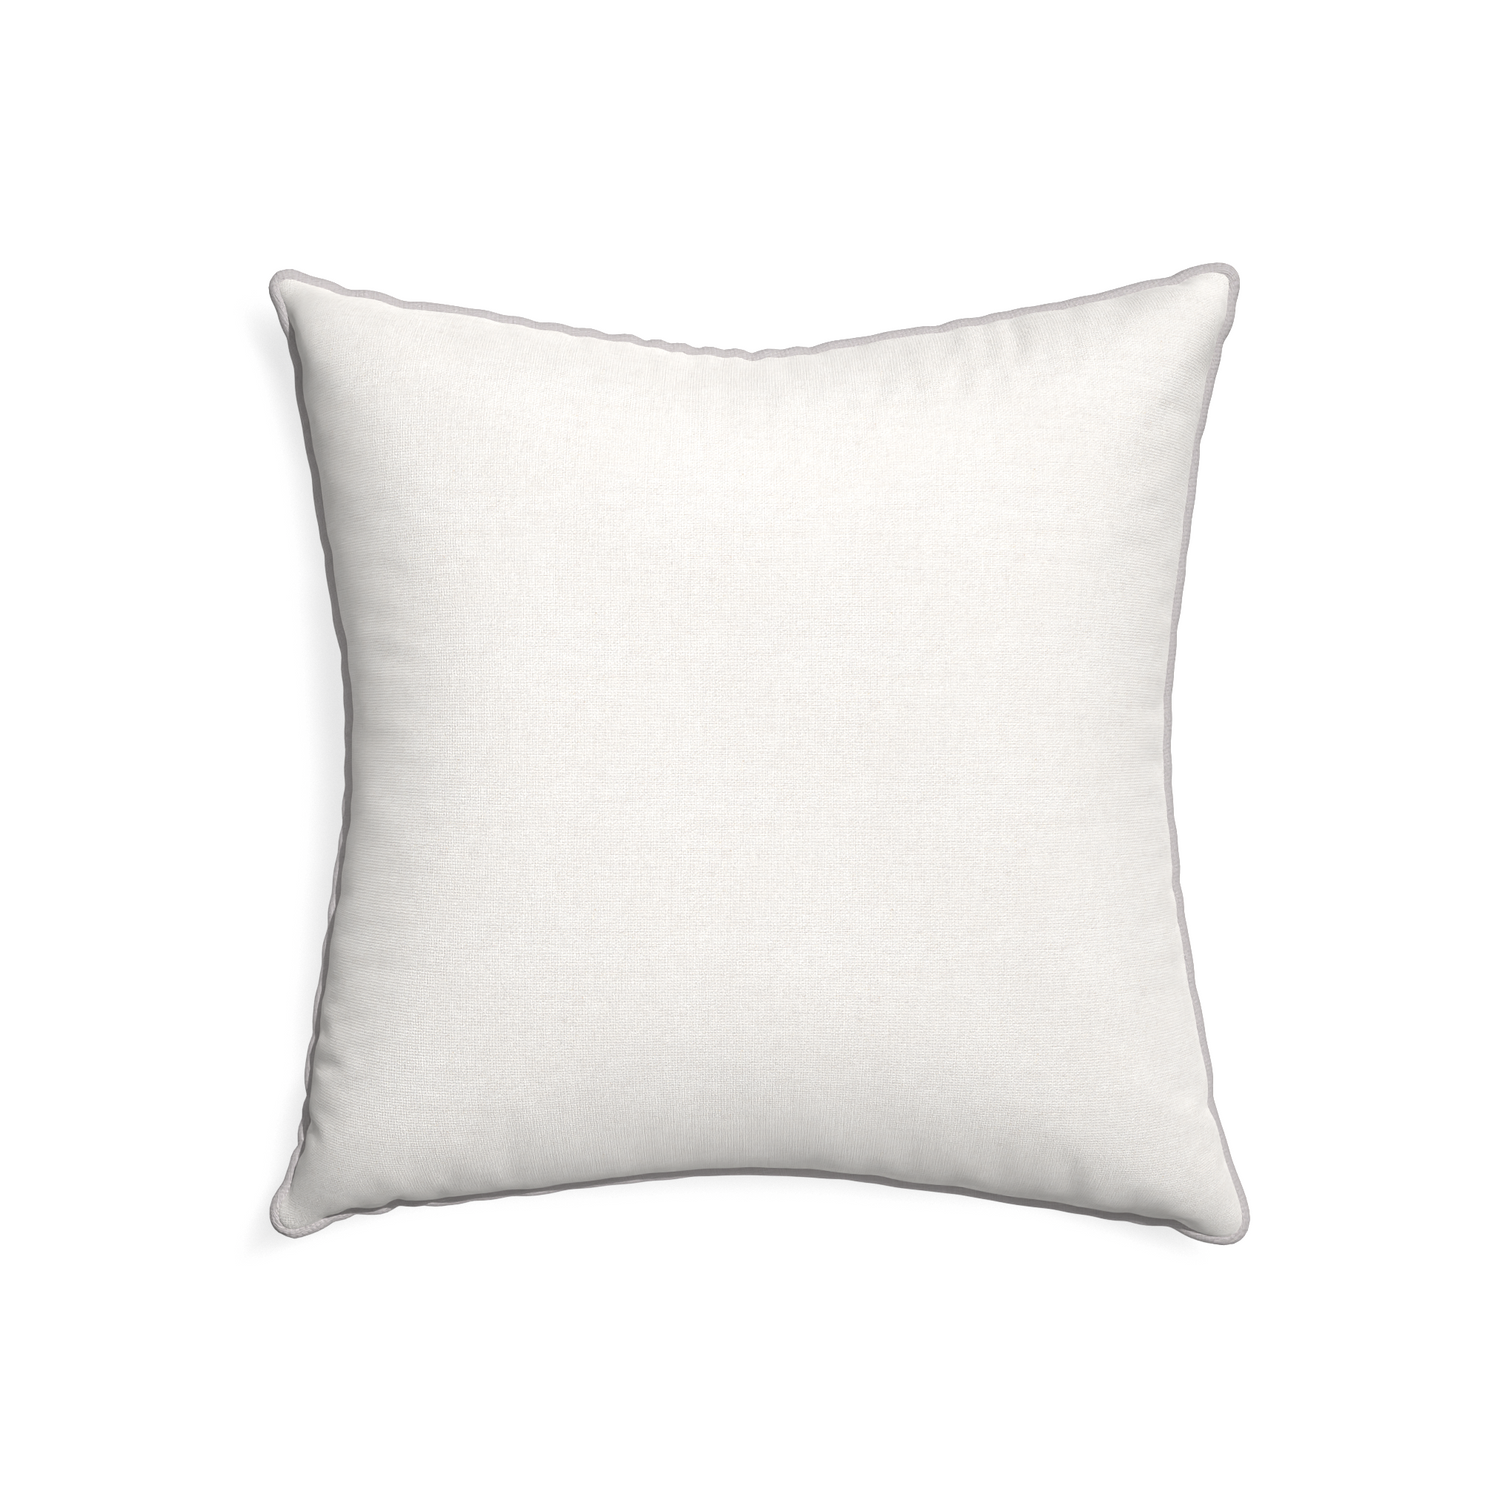 22-square flour custom pillow with pebble piping on white background